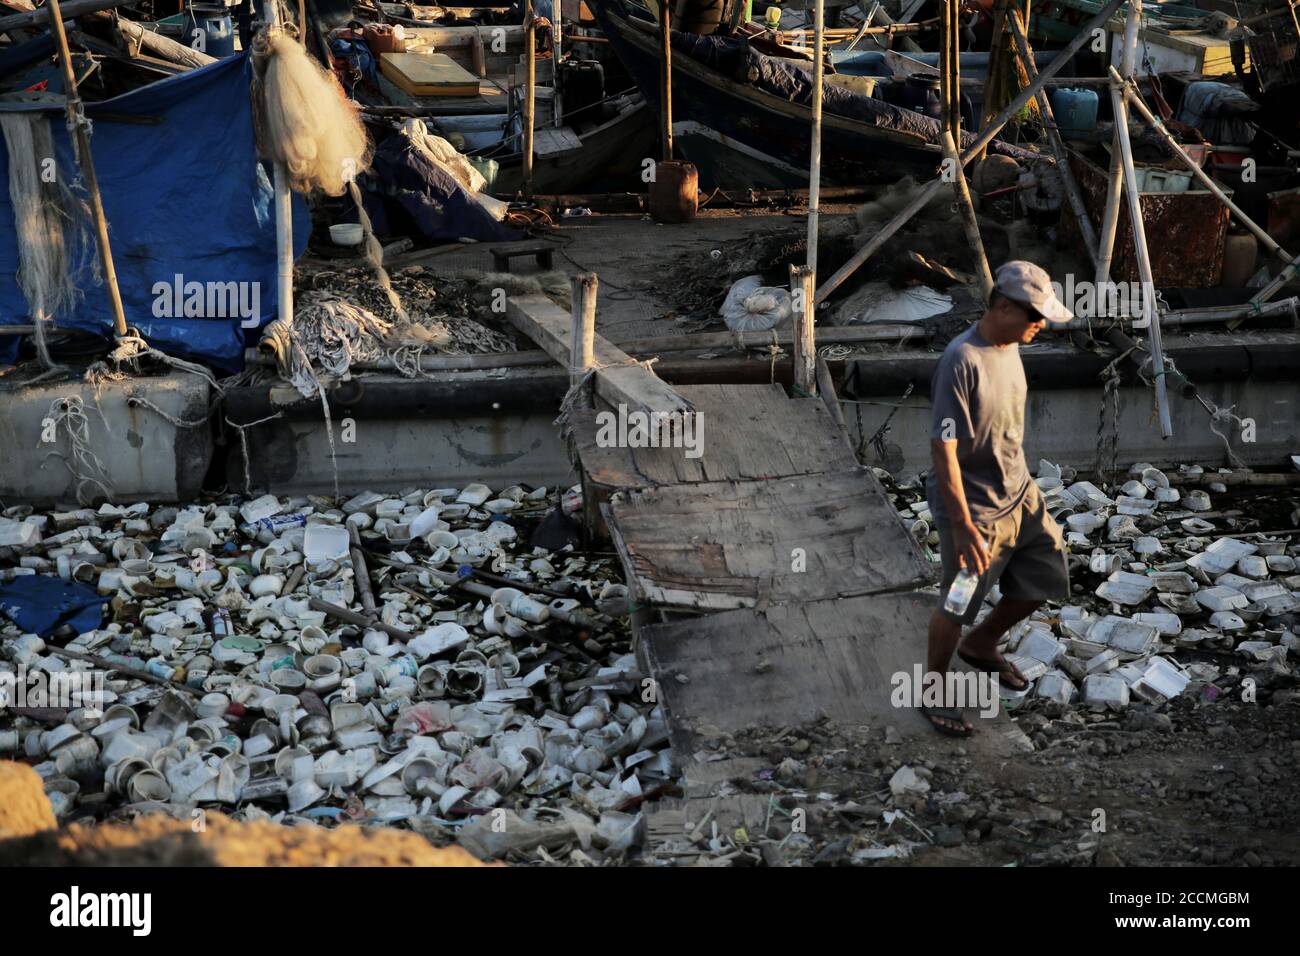 A man walks trough a pile of garbage.Plastic waste that has accumulated around the coast endangers marine life and local residents. Stock Photo